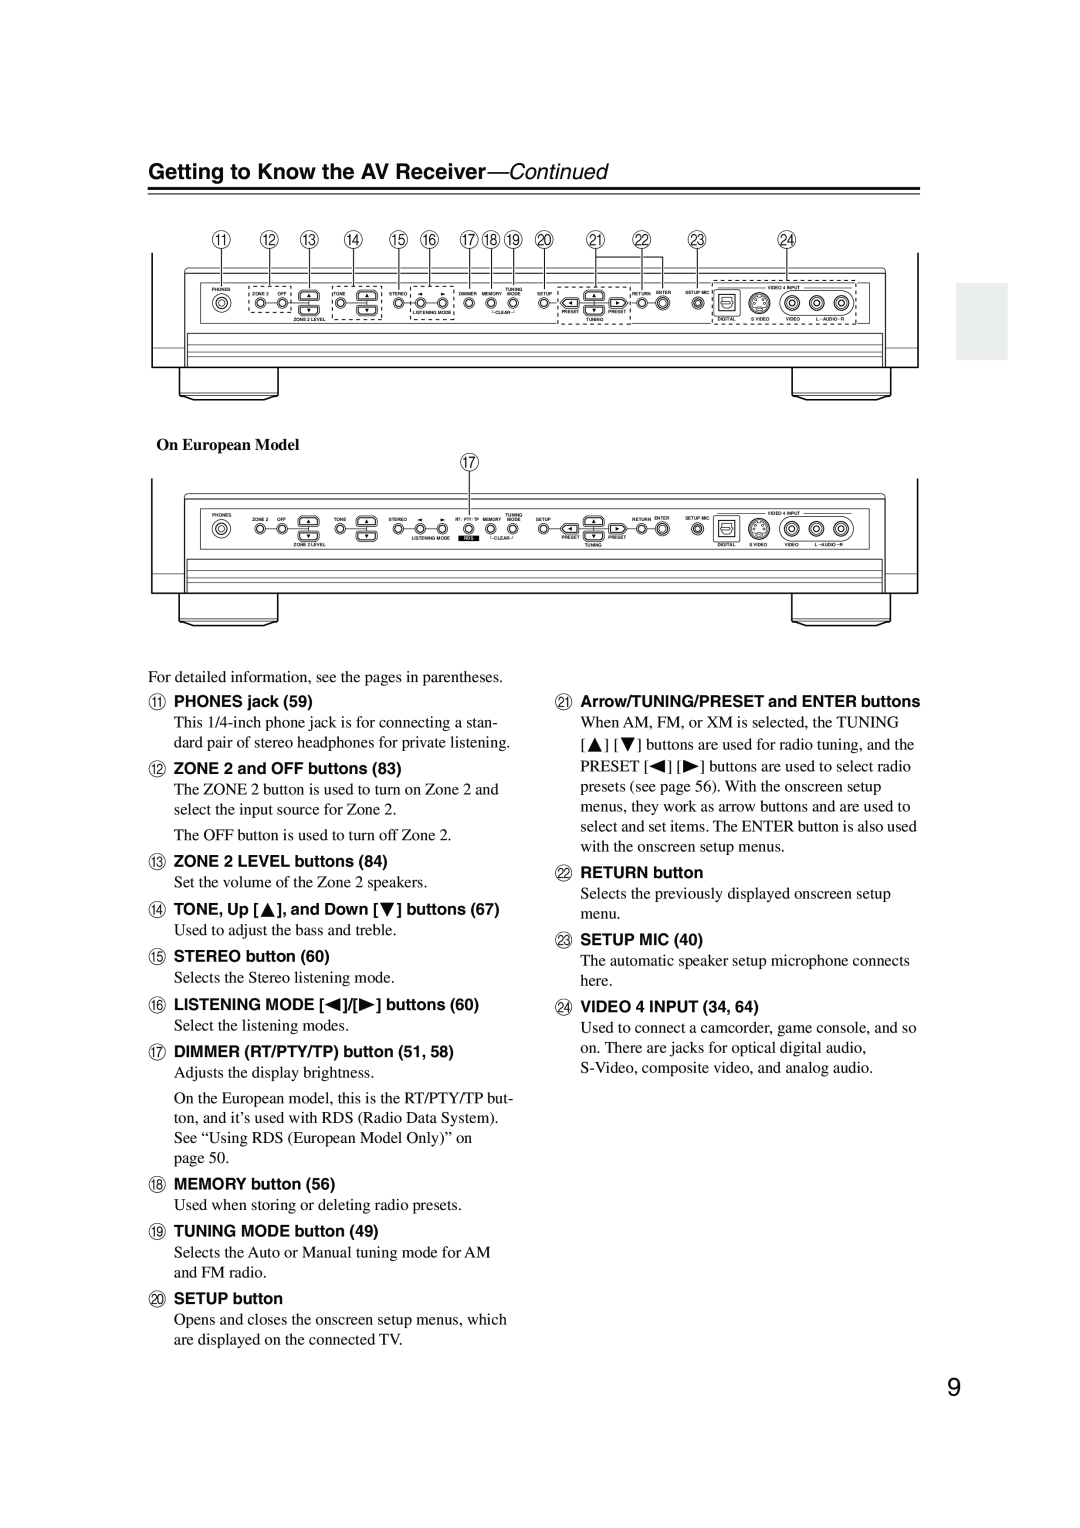 Onkyo SR804 instruction manual Getting to Know the AV Receiver—Continued, K L M N O P Qrs T U V W, On European Model 